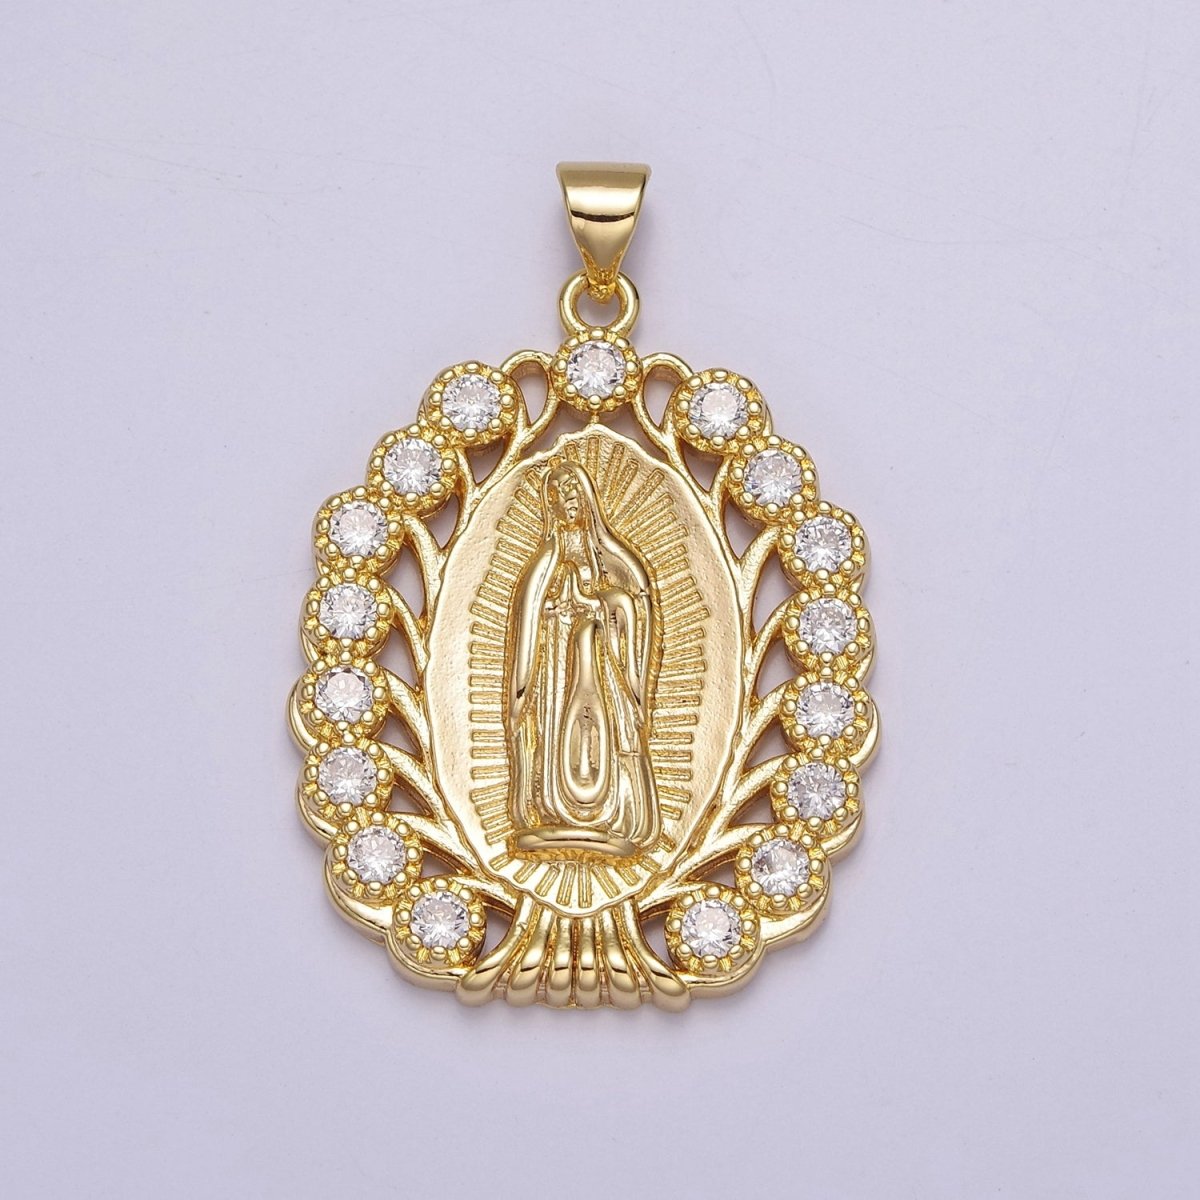 Gold Filled Virgin Mary Pendant Gold Lady Guadalupe Medallion Charm for Religious Necklace J-404 - DLUXCA